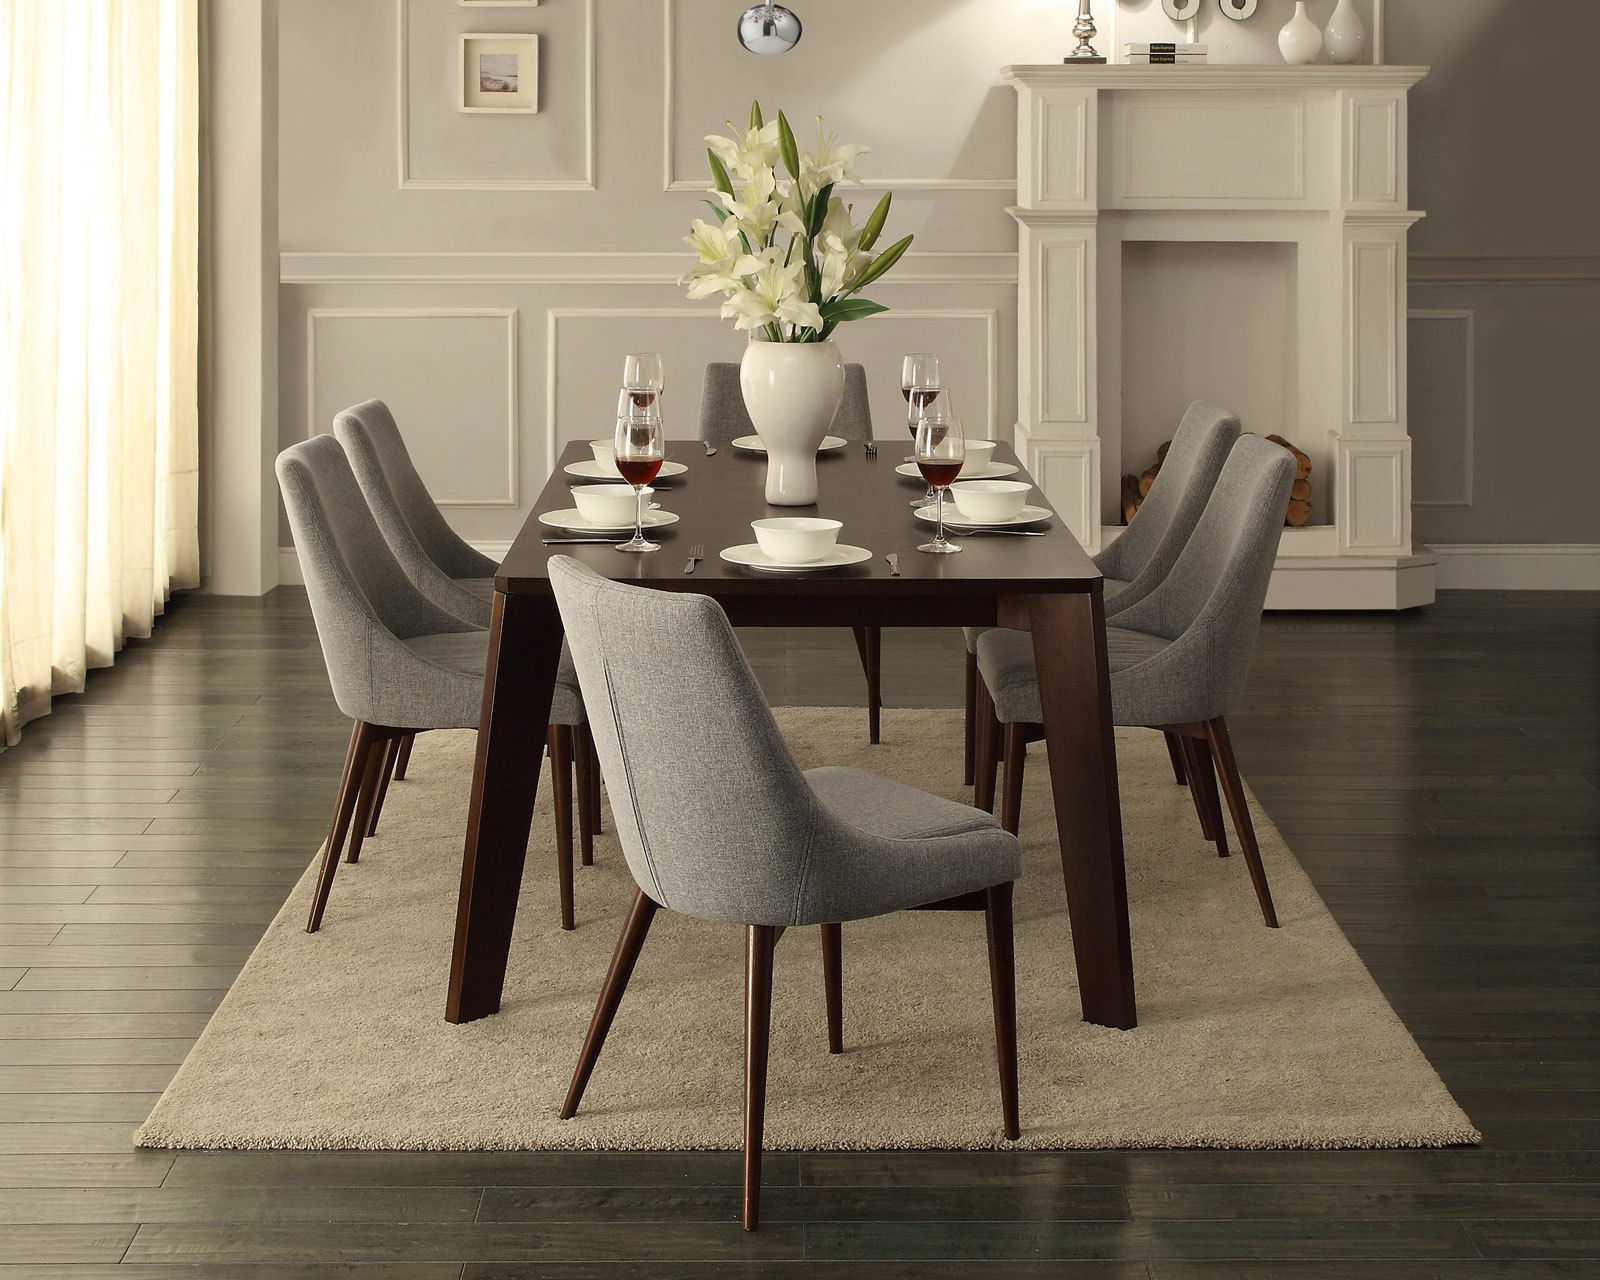 Modern Dining Room Chairs South Africa